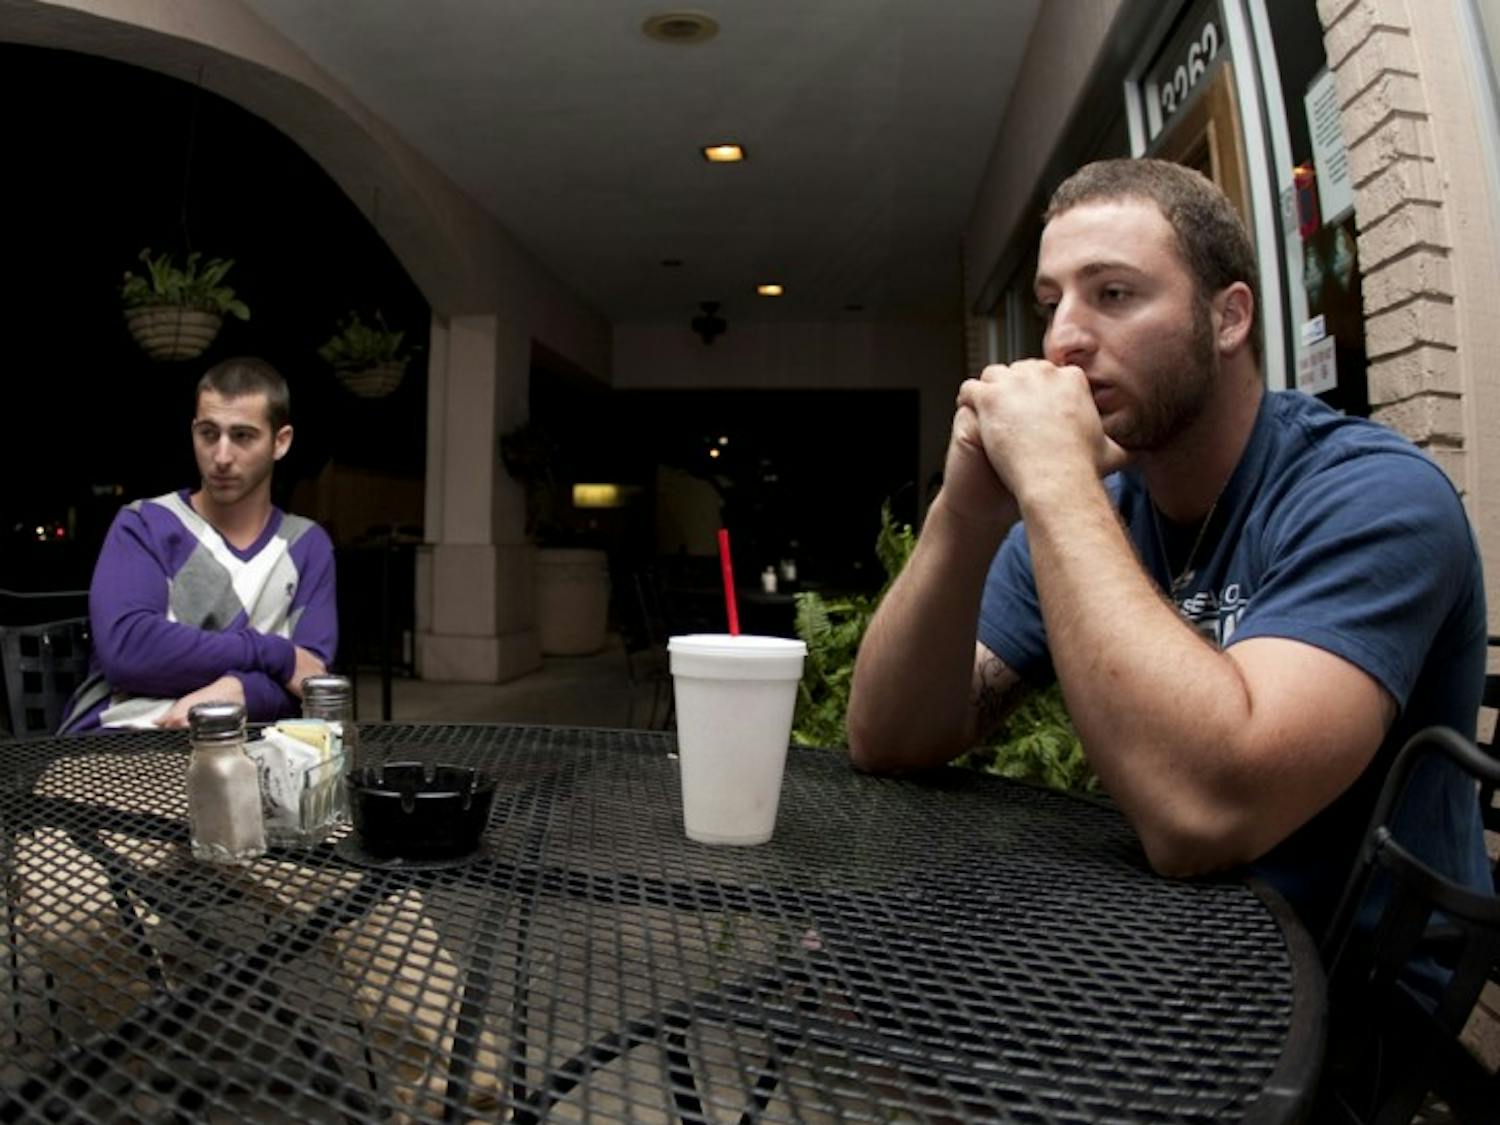 Jude Rizzo, 21, right, sits with his 19-year-old brother, Joel Rizzo, at McAlister’s Deli. Jude told police he shot and killed his roommate, Michael Crace, in self-defense on April 2.